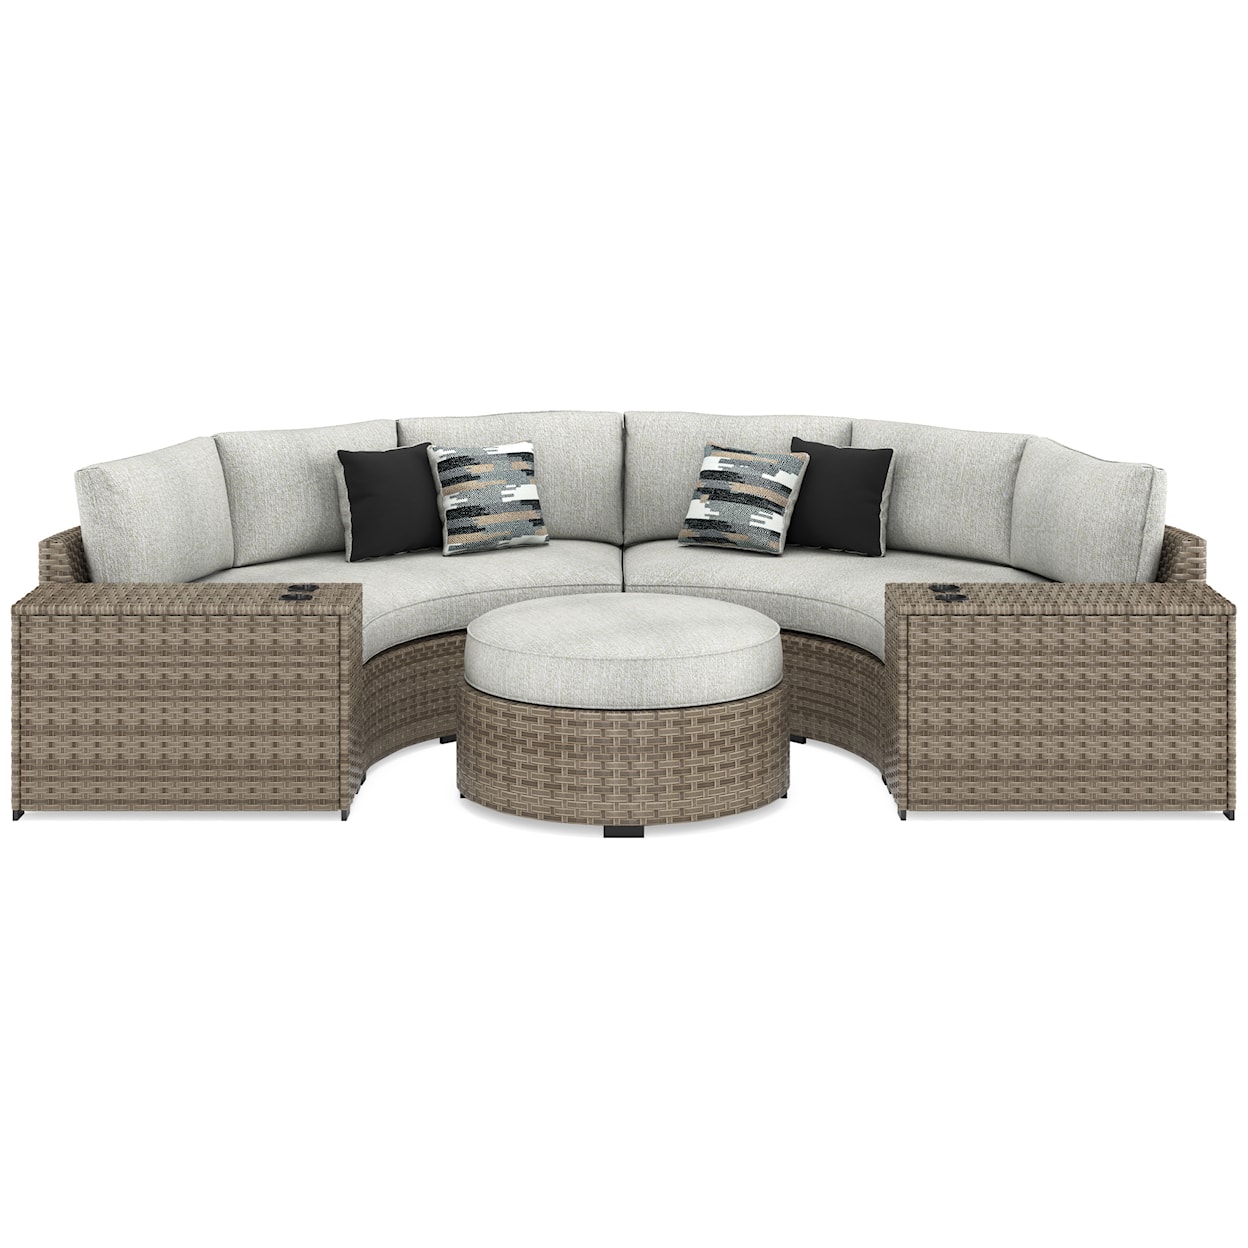 Michael Alan Select Calworth 4-Piece Outdoor Sectional